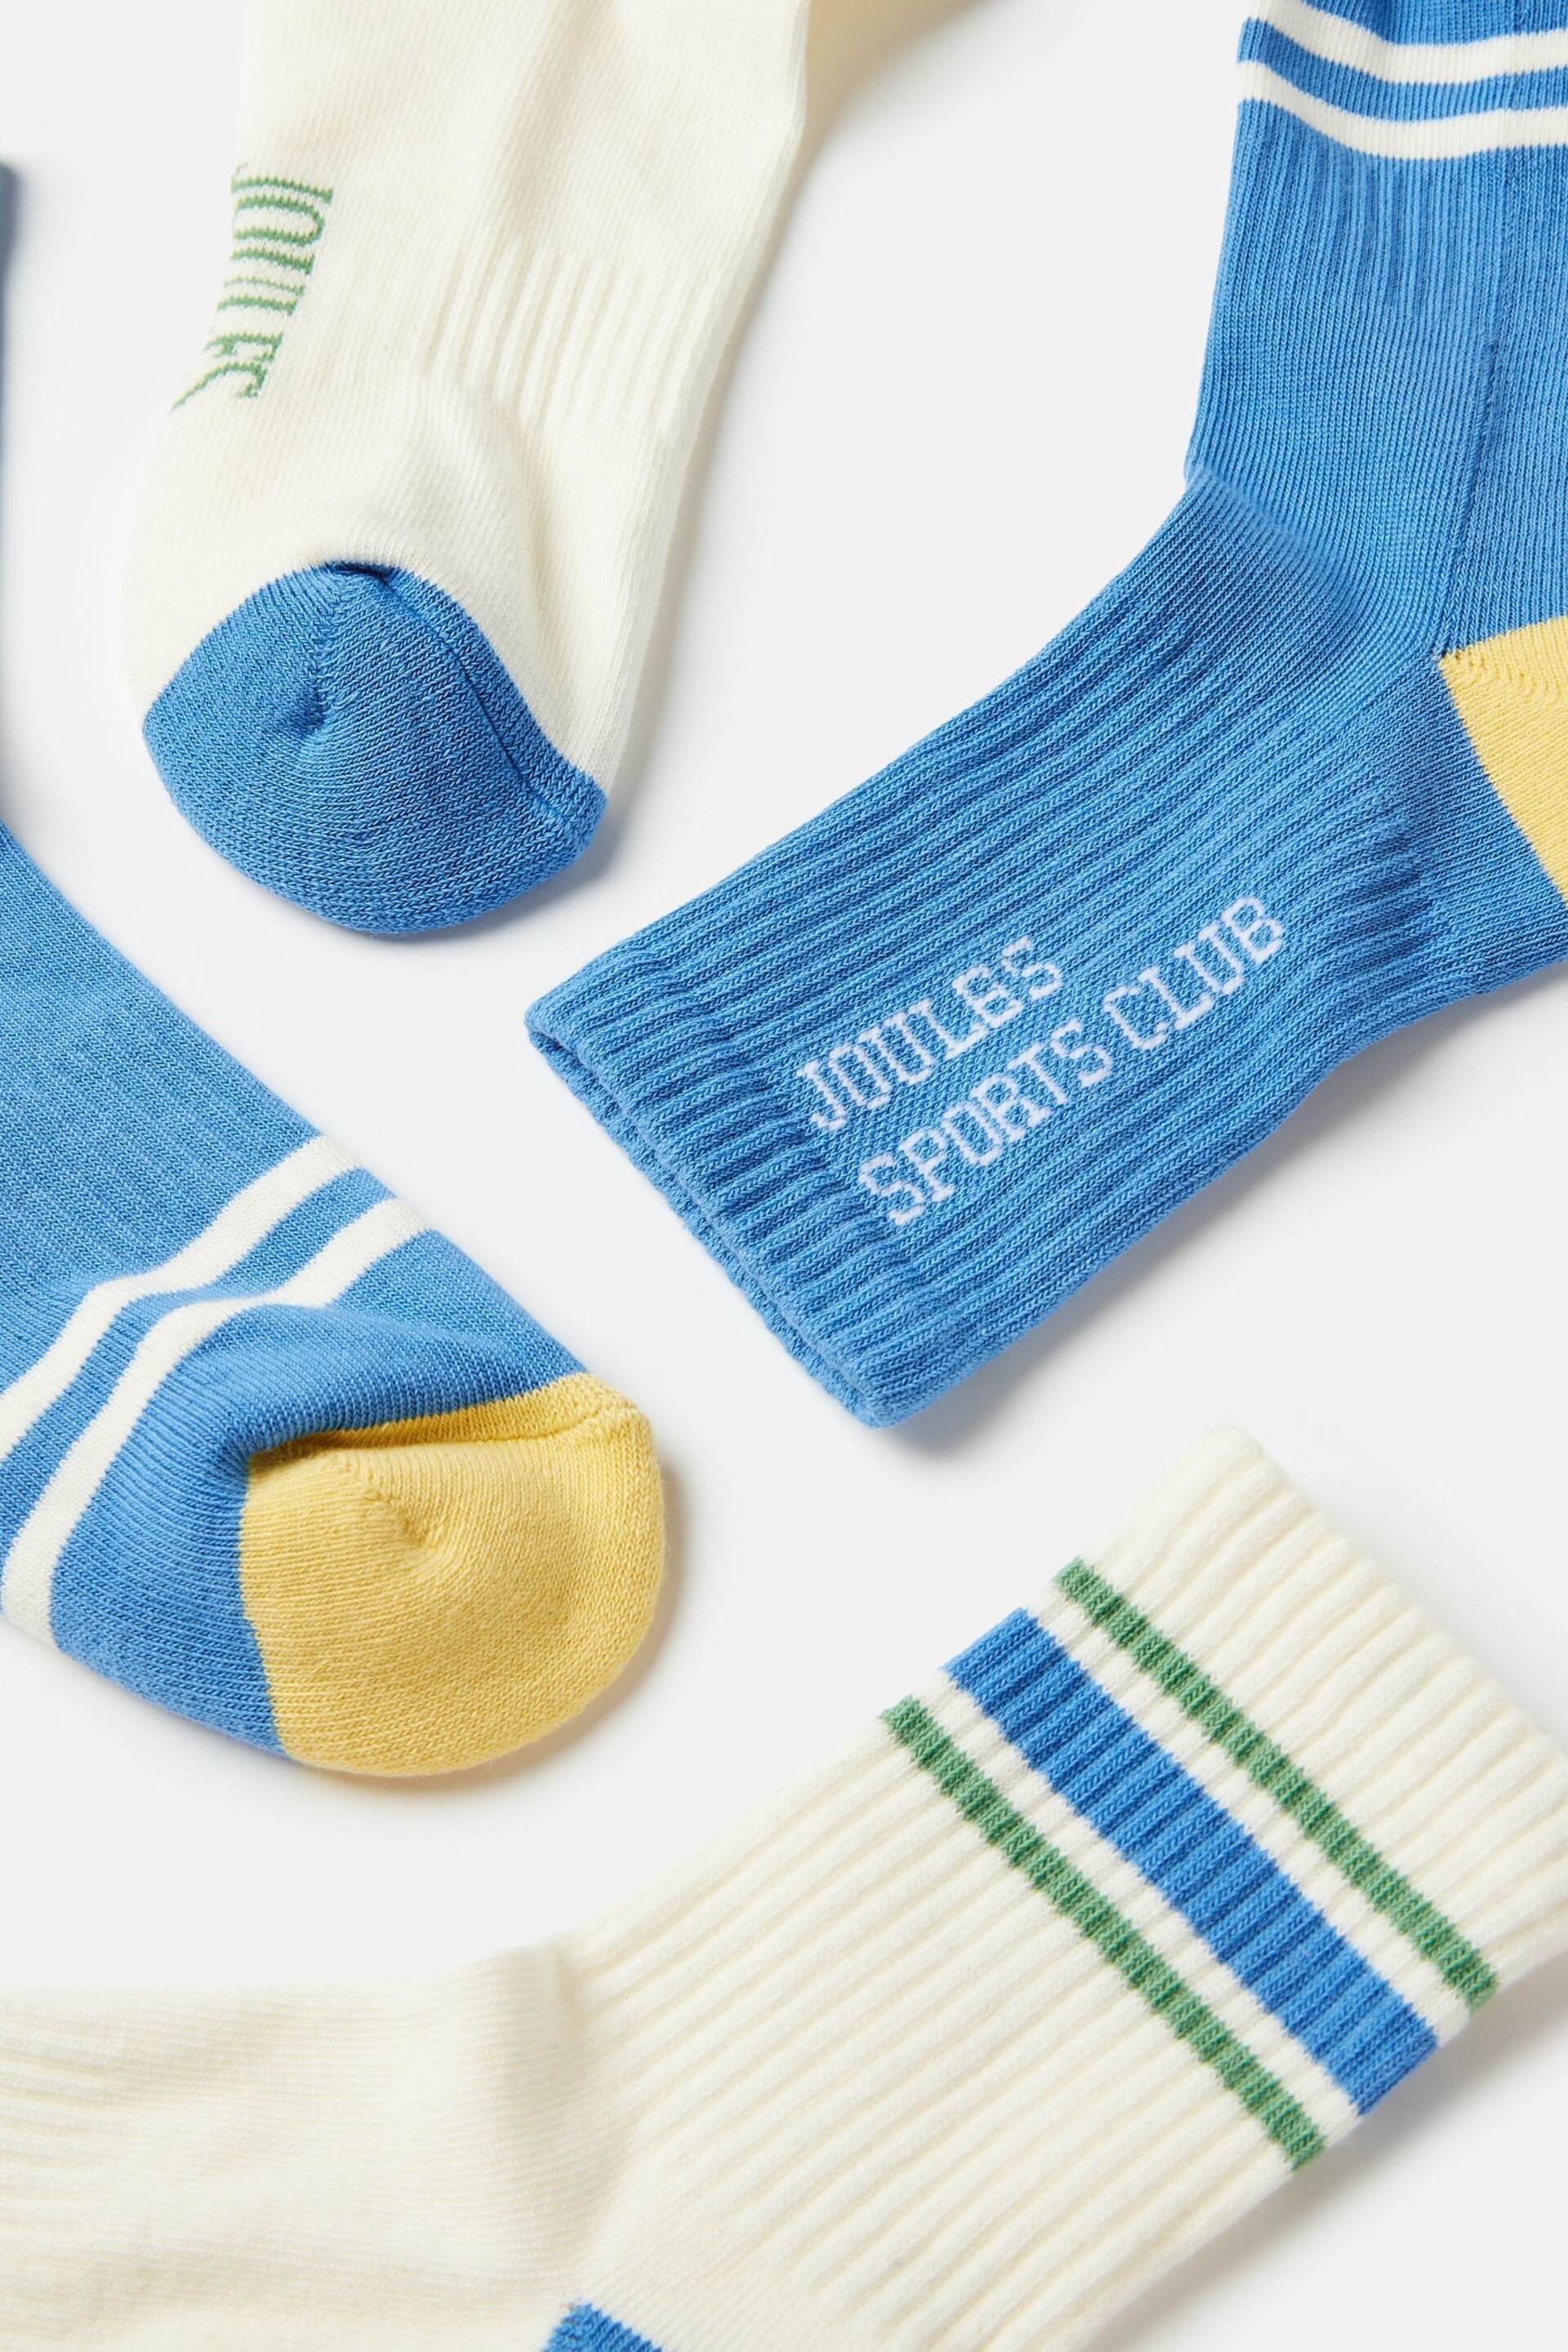 Joules Boys' Volley Blue Tennis Ankle Socks (2 Pack) - Image 3 of 3